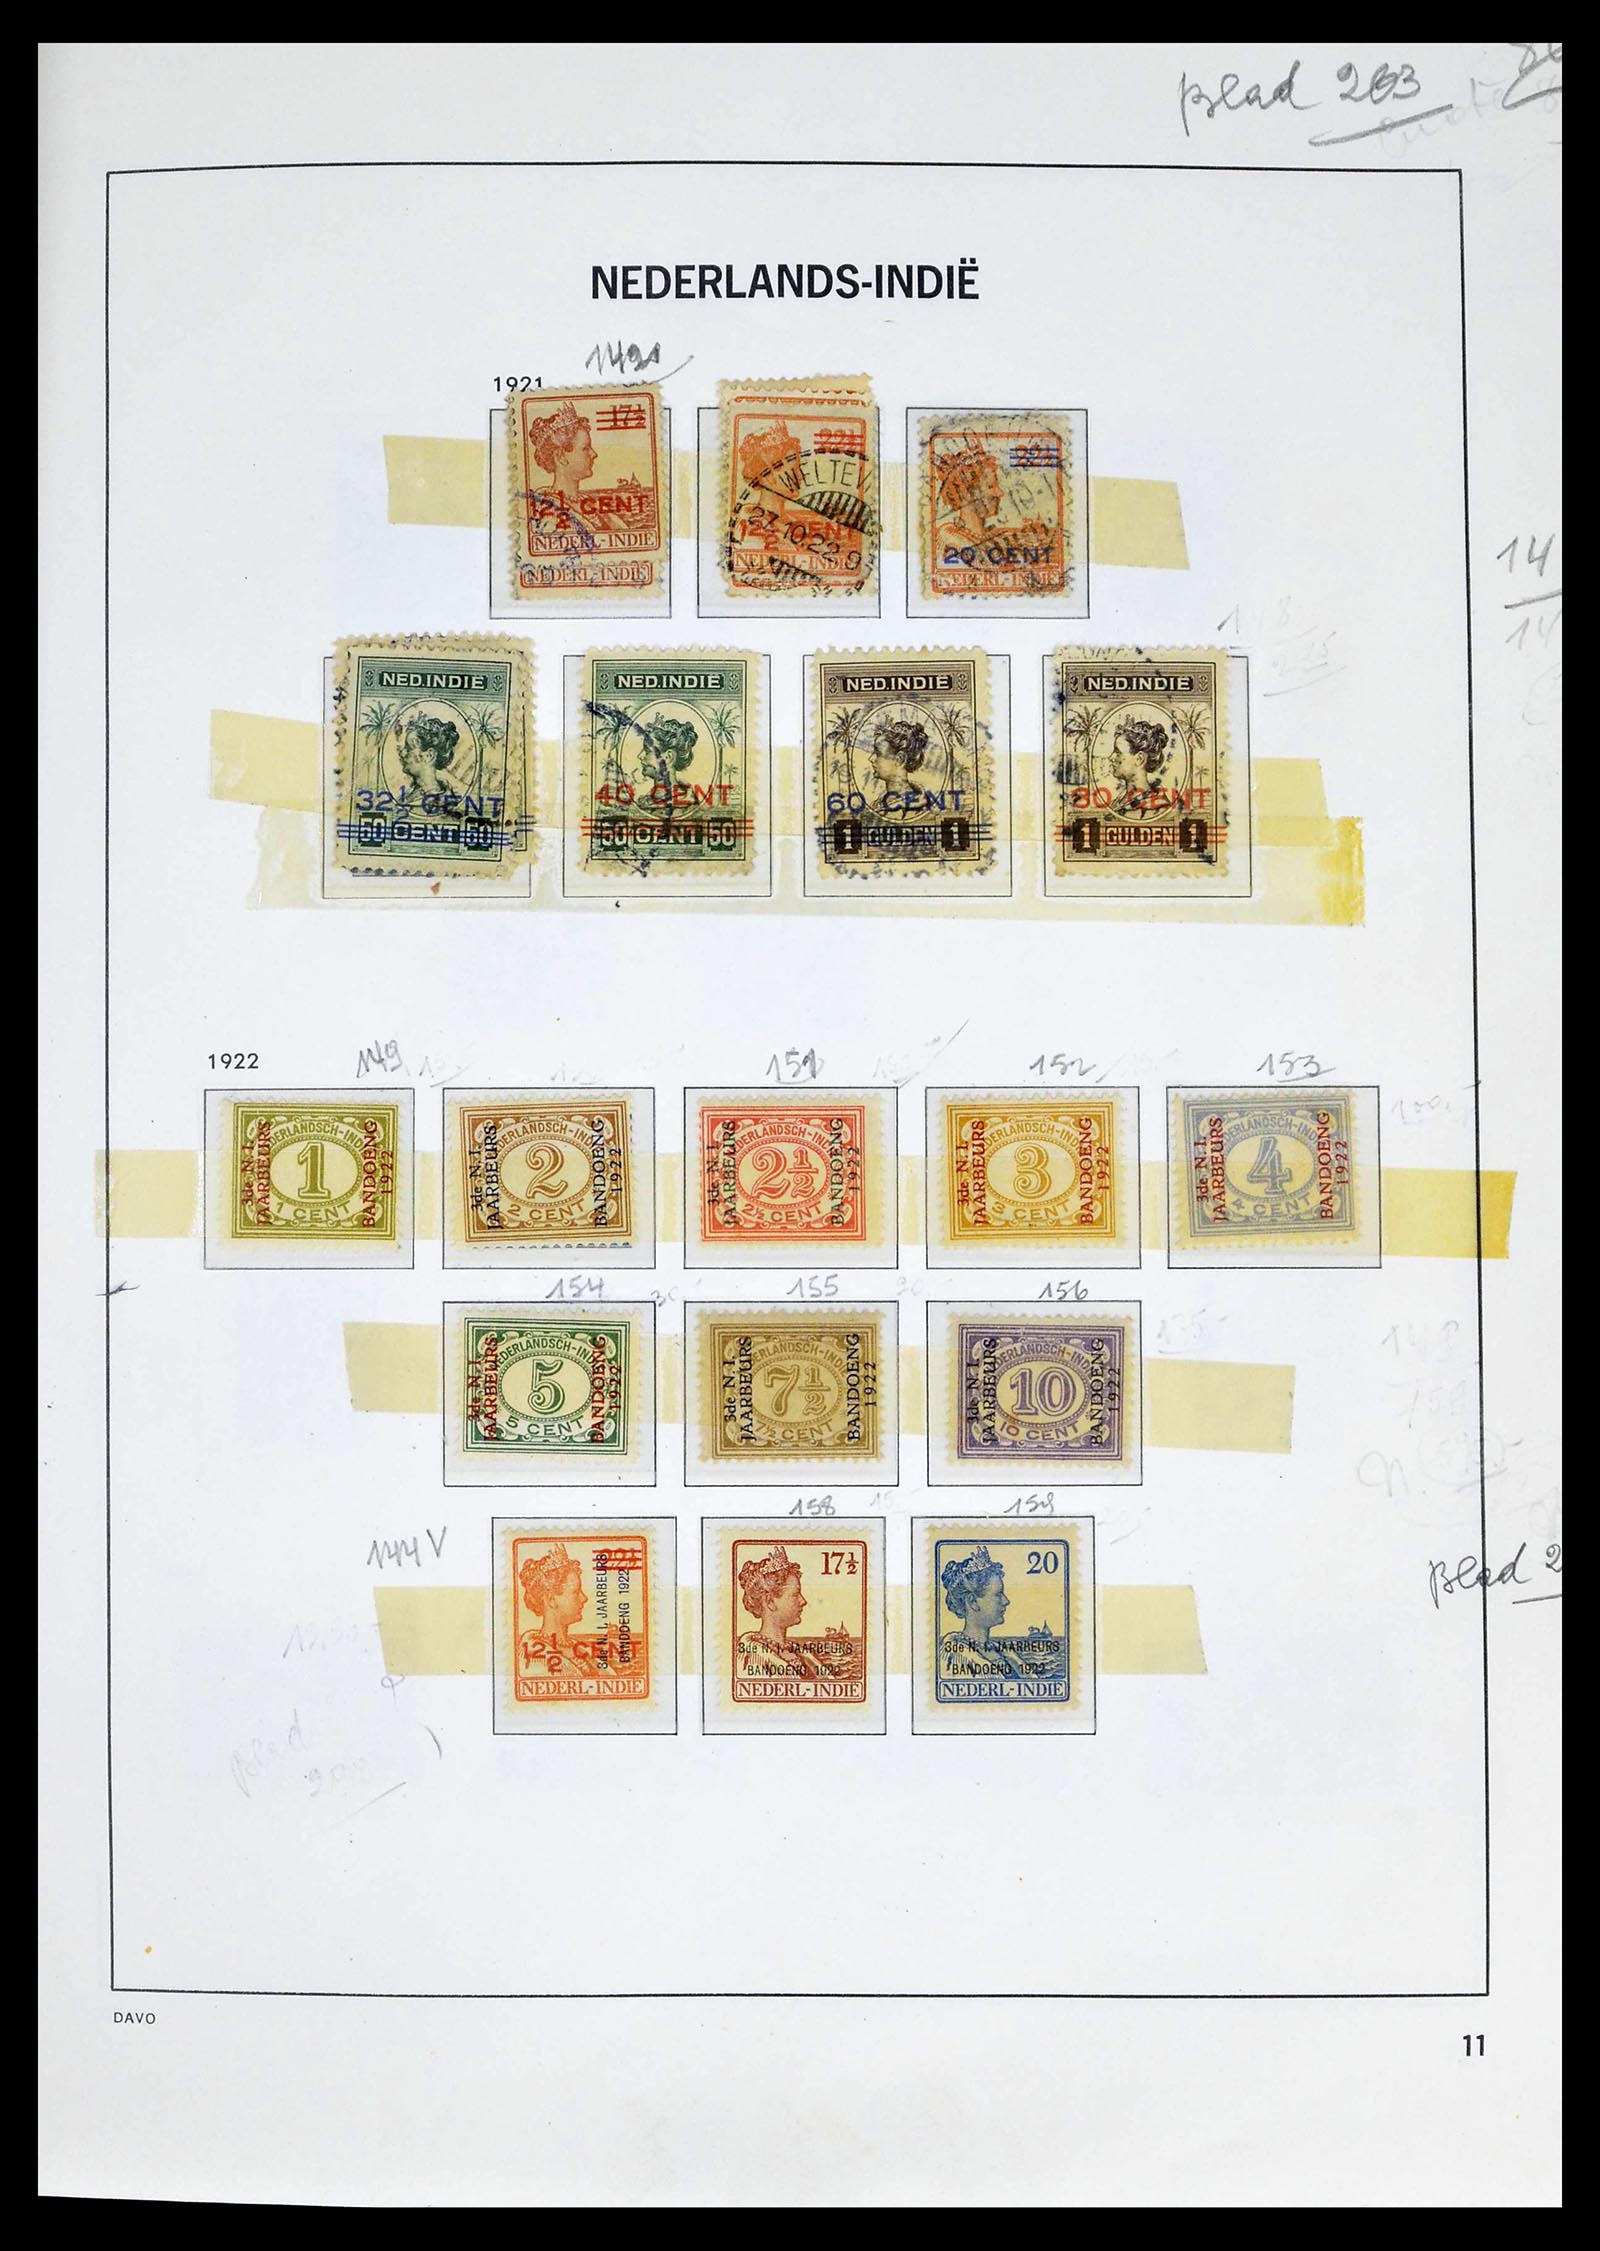 39263 0011 - Stamp collection 39263 Dutch territories 1864-1970.